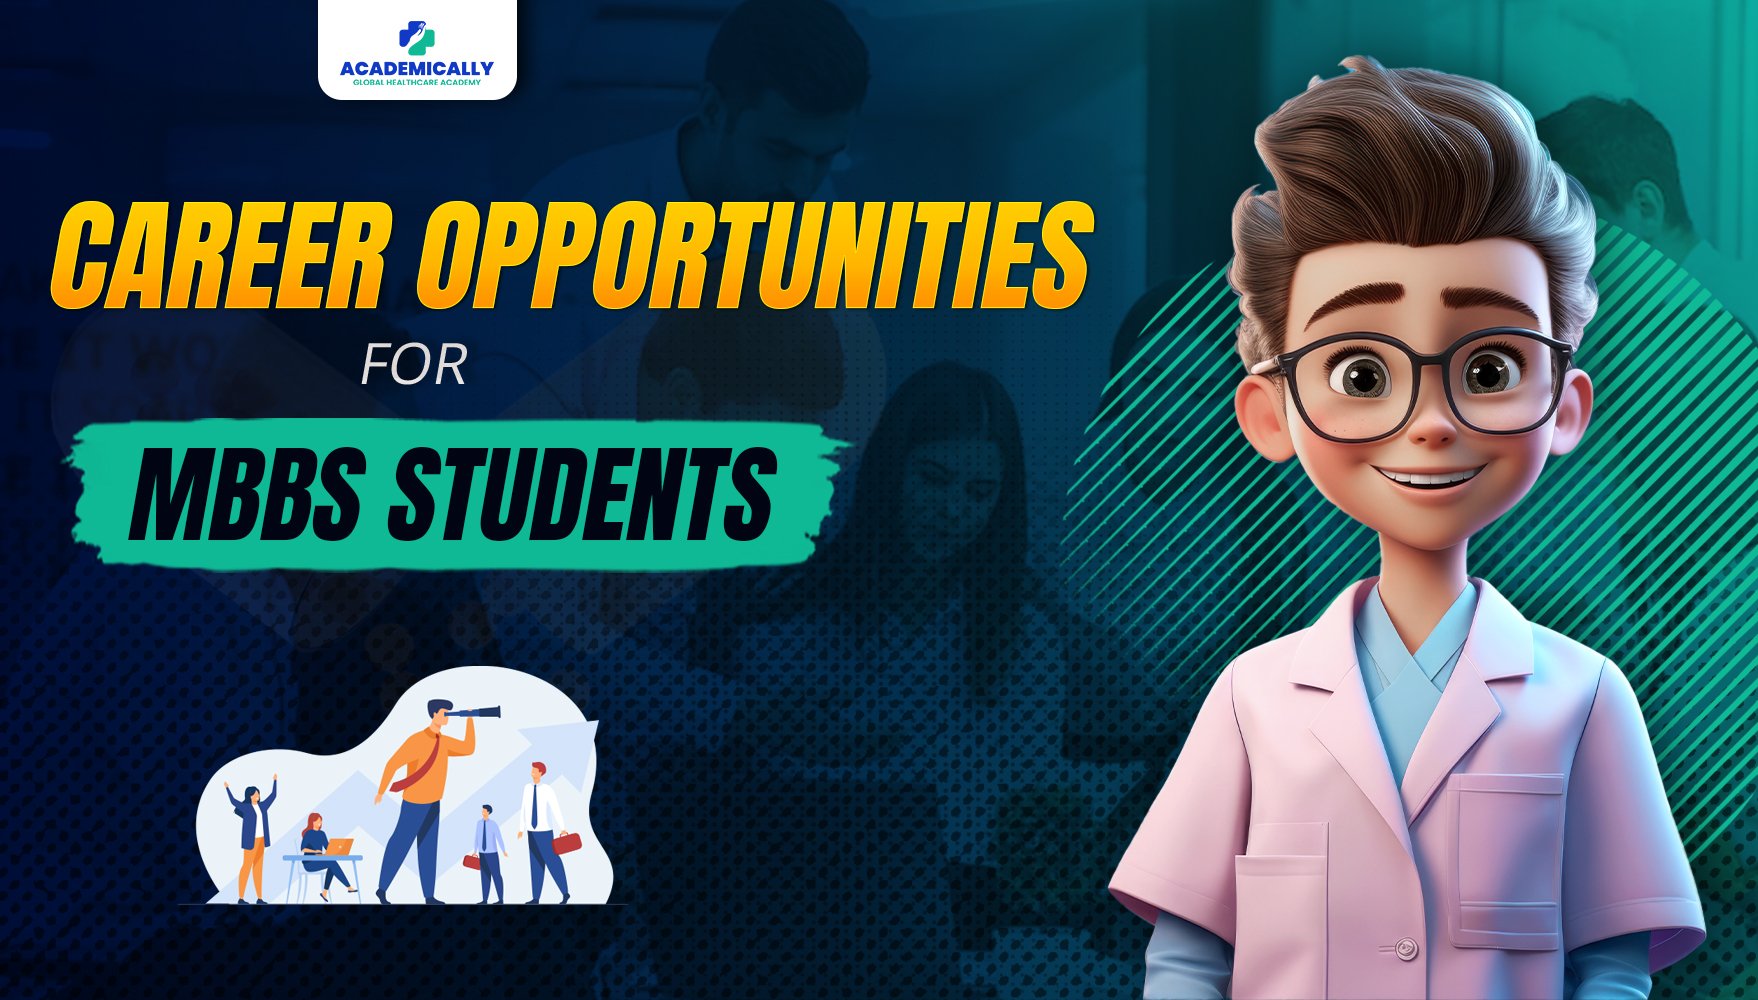 Career Opportunities for MBBS Graduates